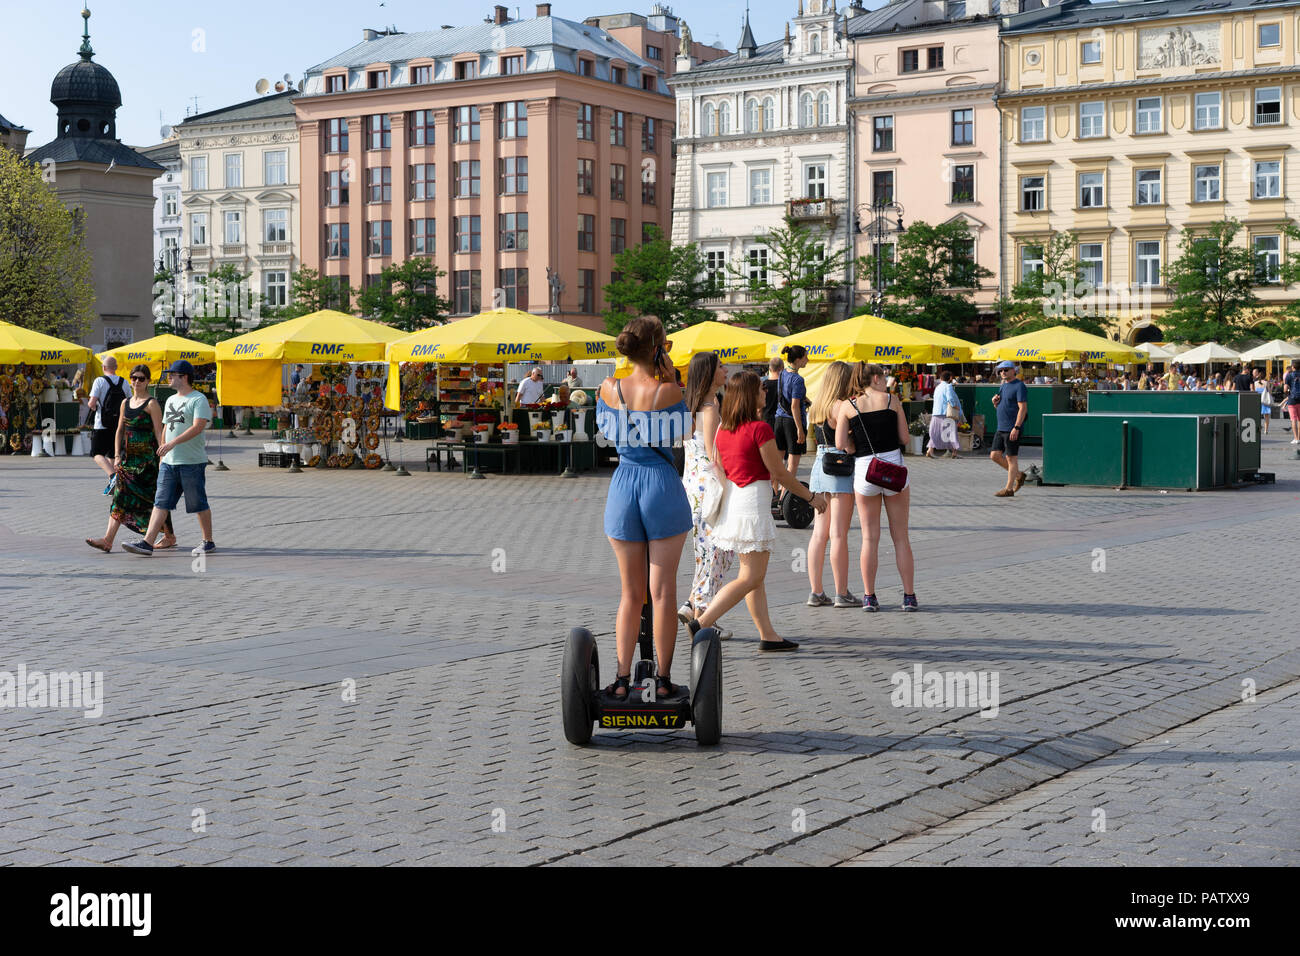 Young Woman on a Segway Board in the main square,Krakow, Poland, Europe. Stock Photo